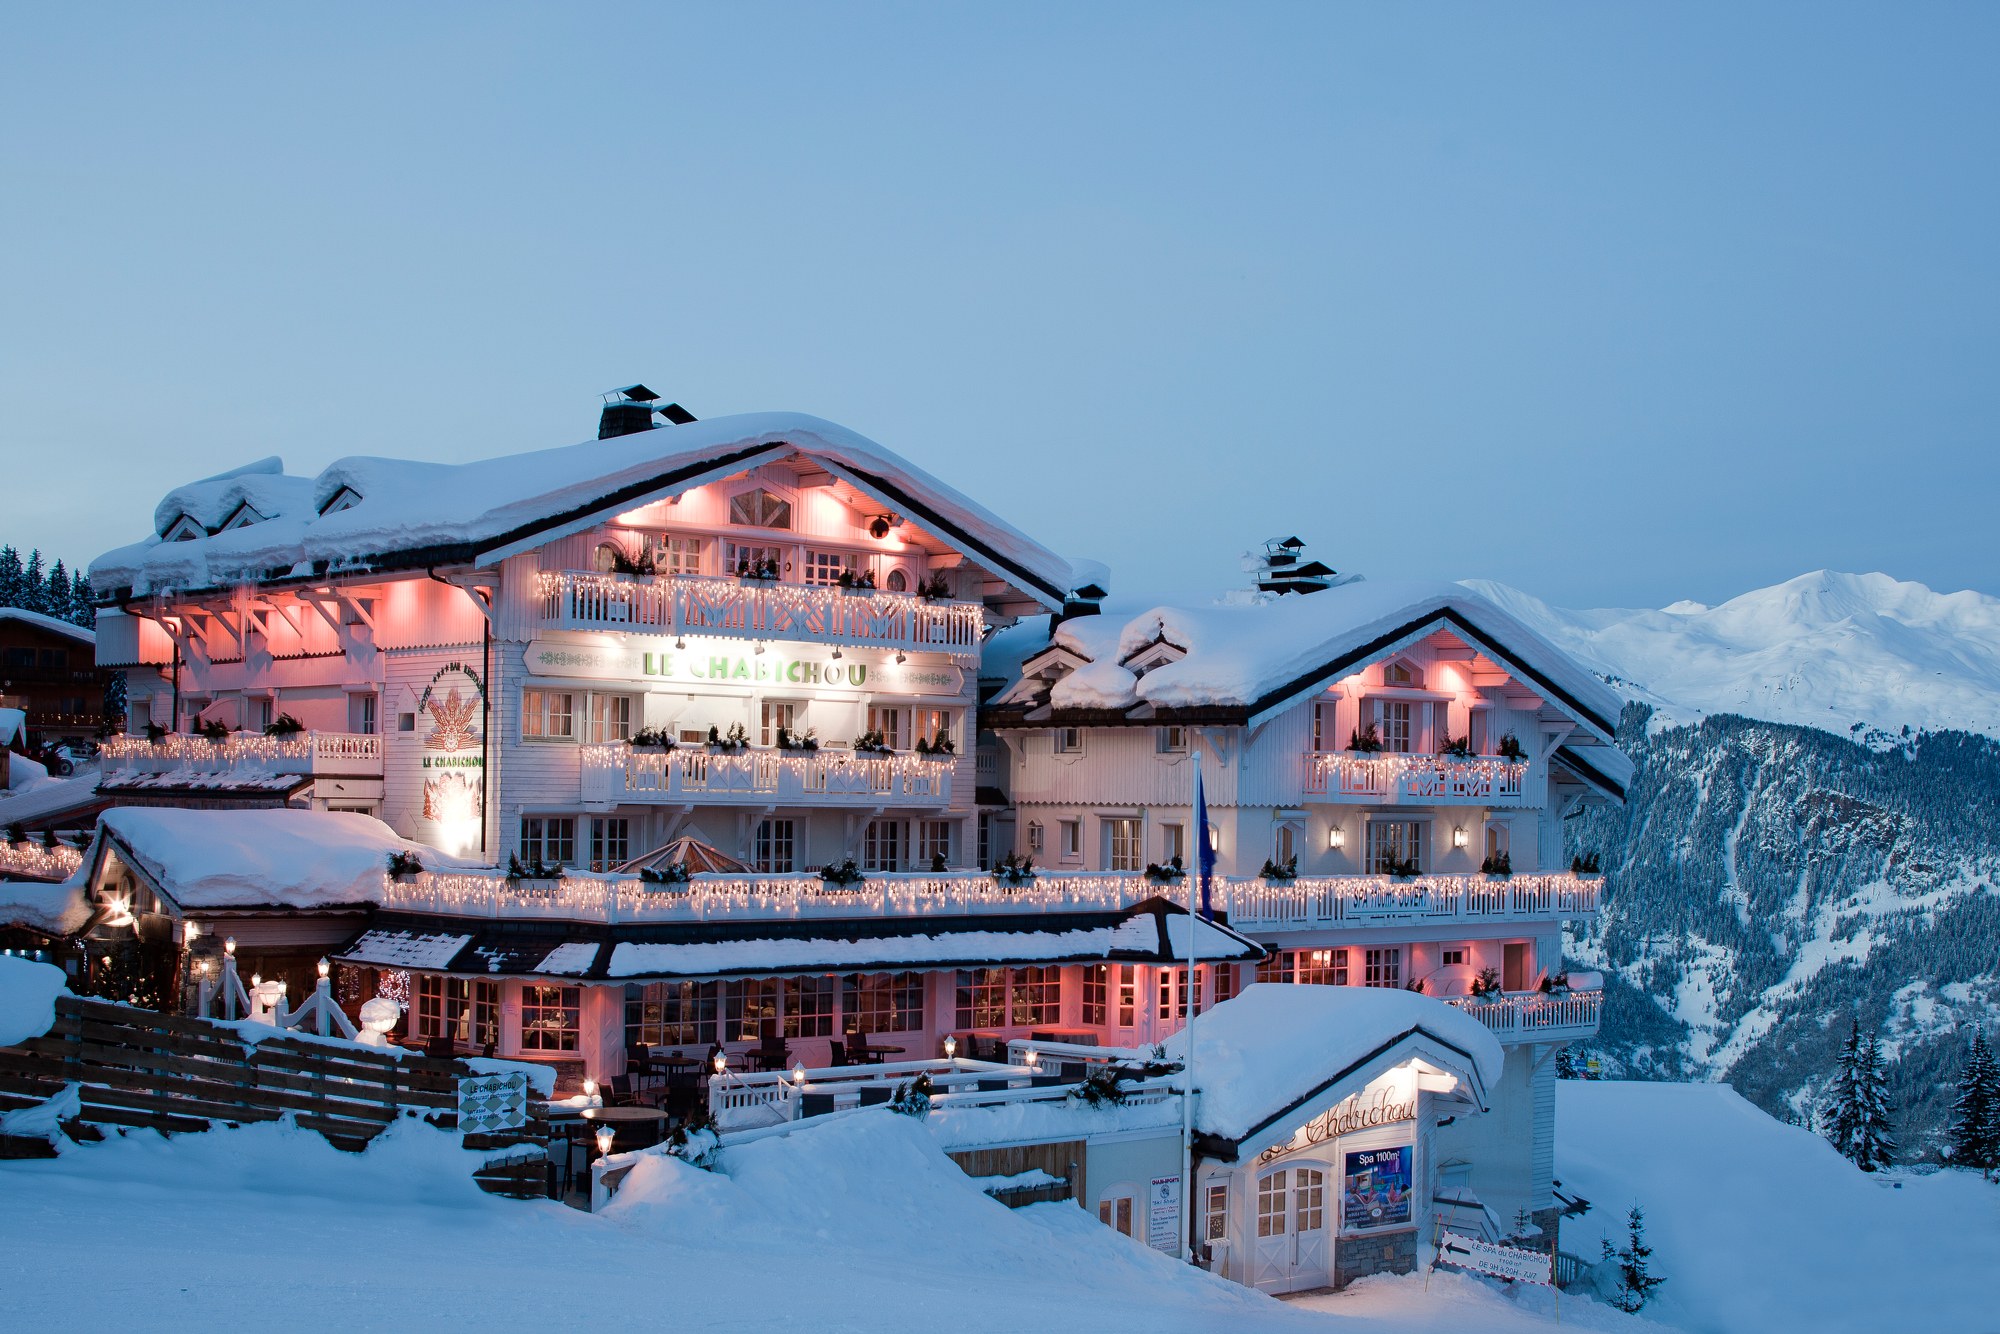 7 Ski Resorts You'll Want to Visit Even If You're Only in It For the ...